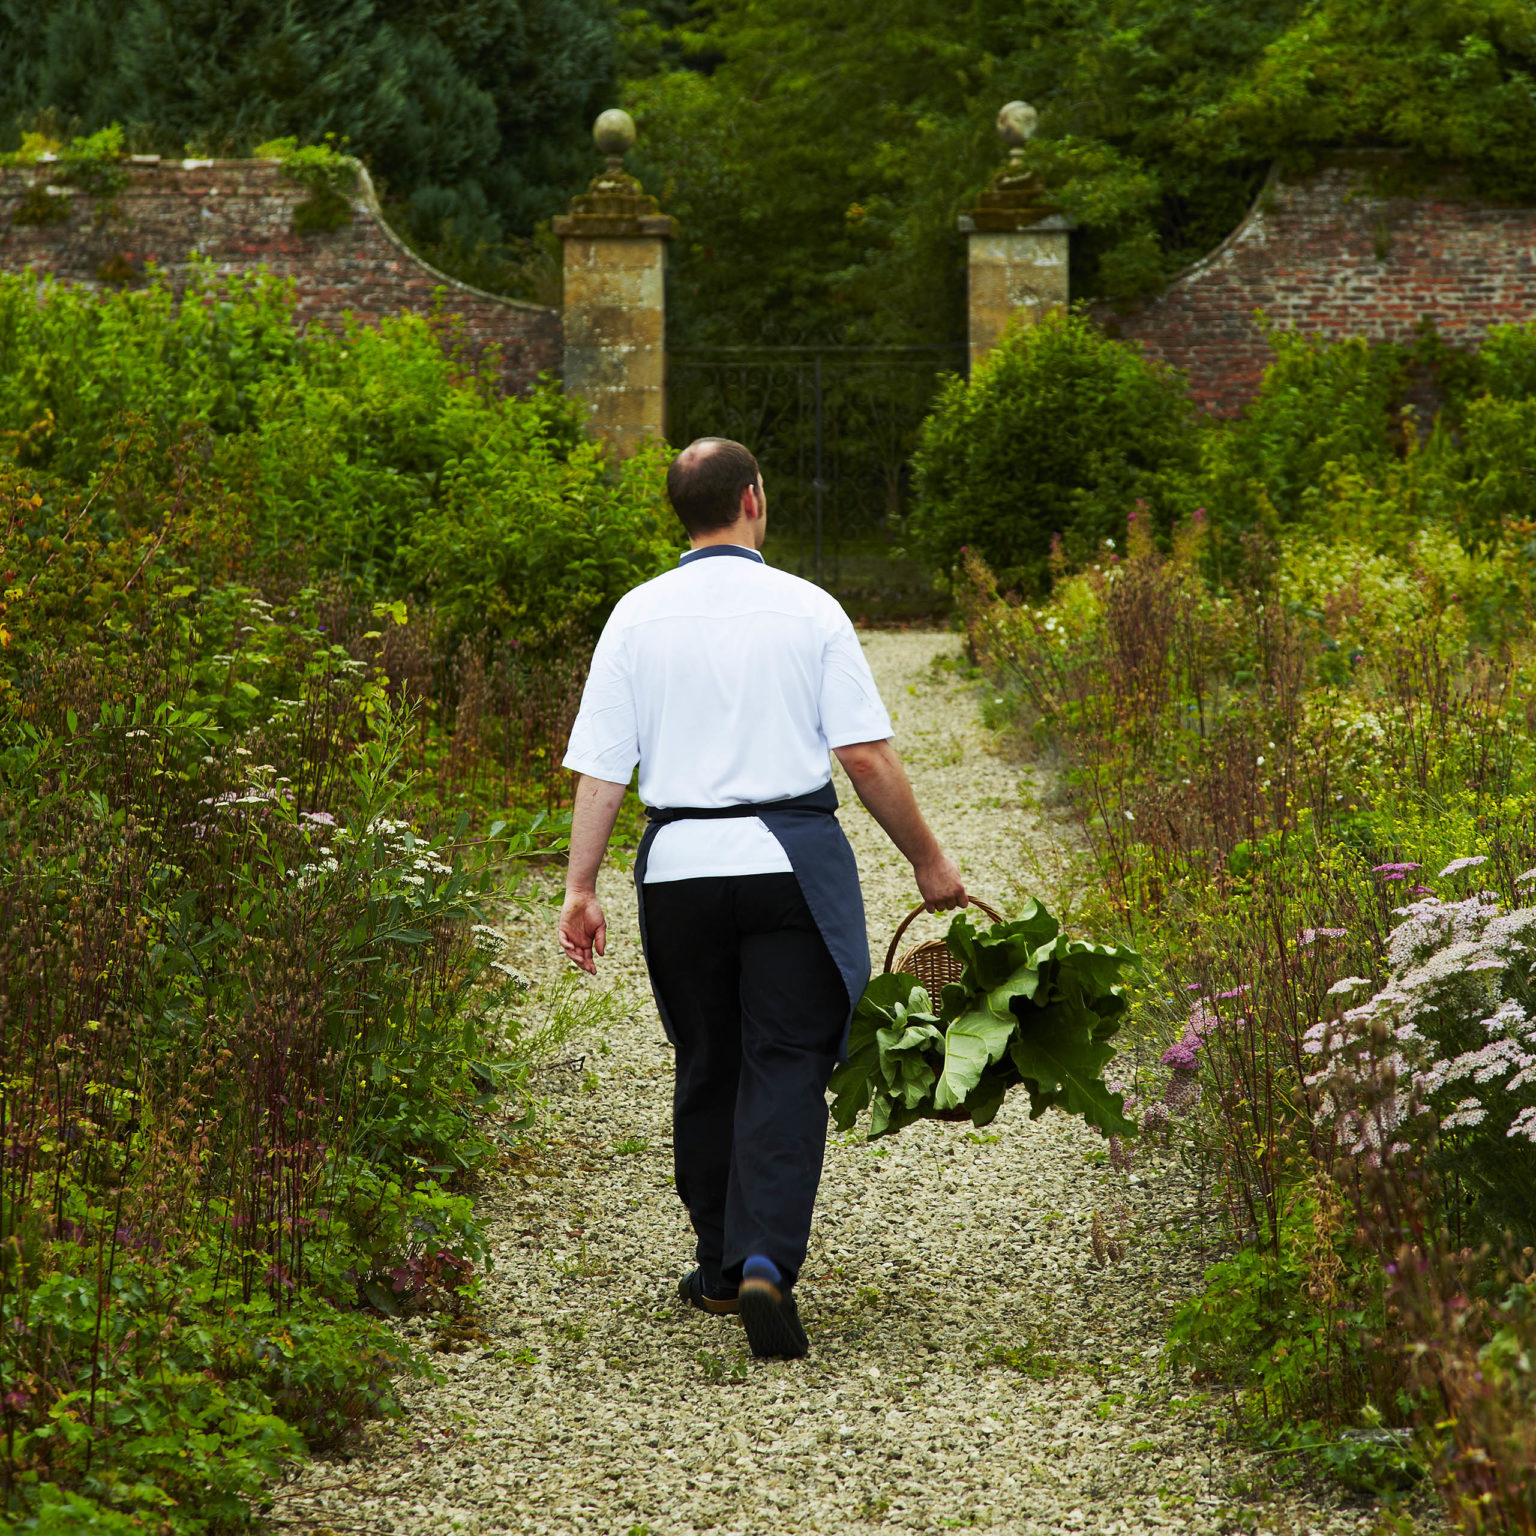 A chef with a basket of fresh vegetables walking among the Walled Garden at Swinton Estate in North Yorkshire